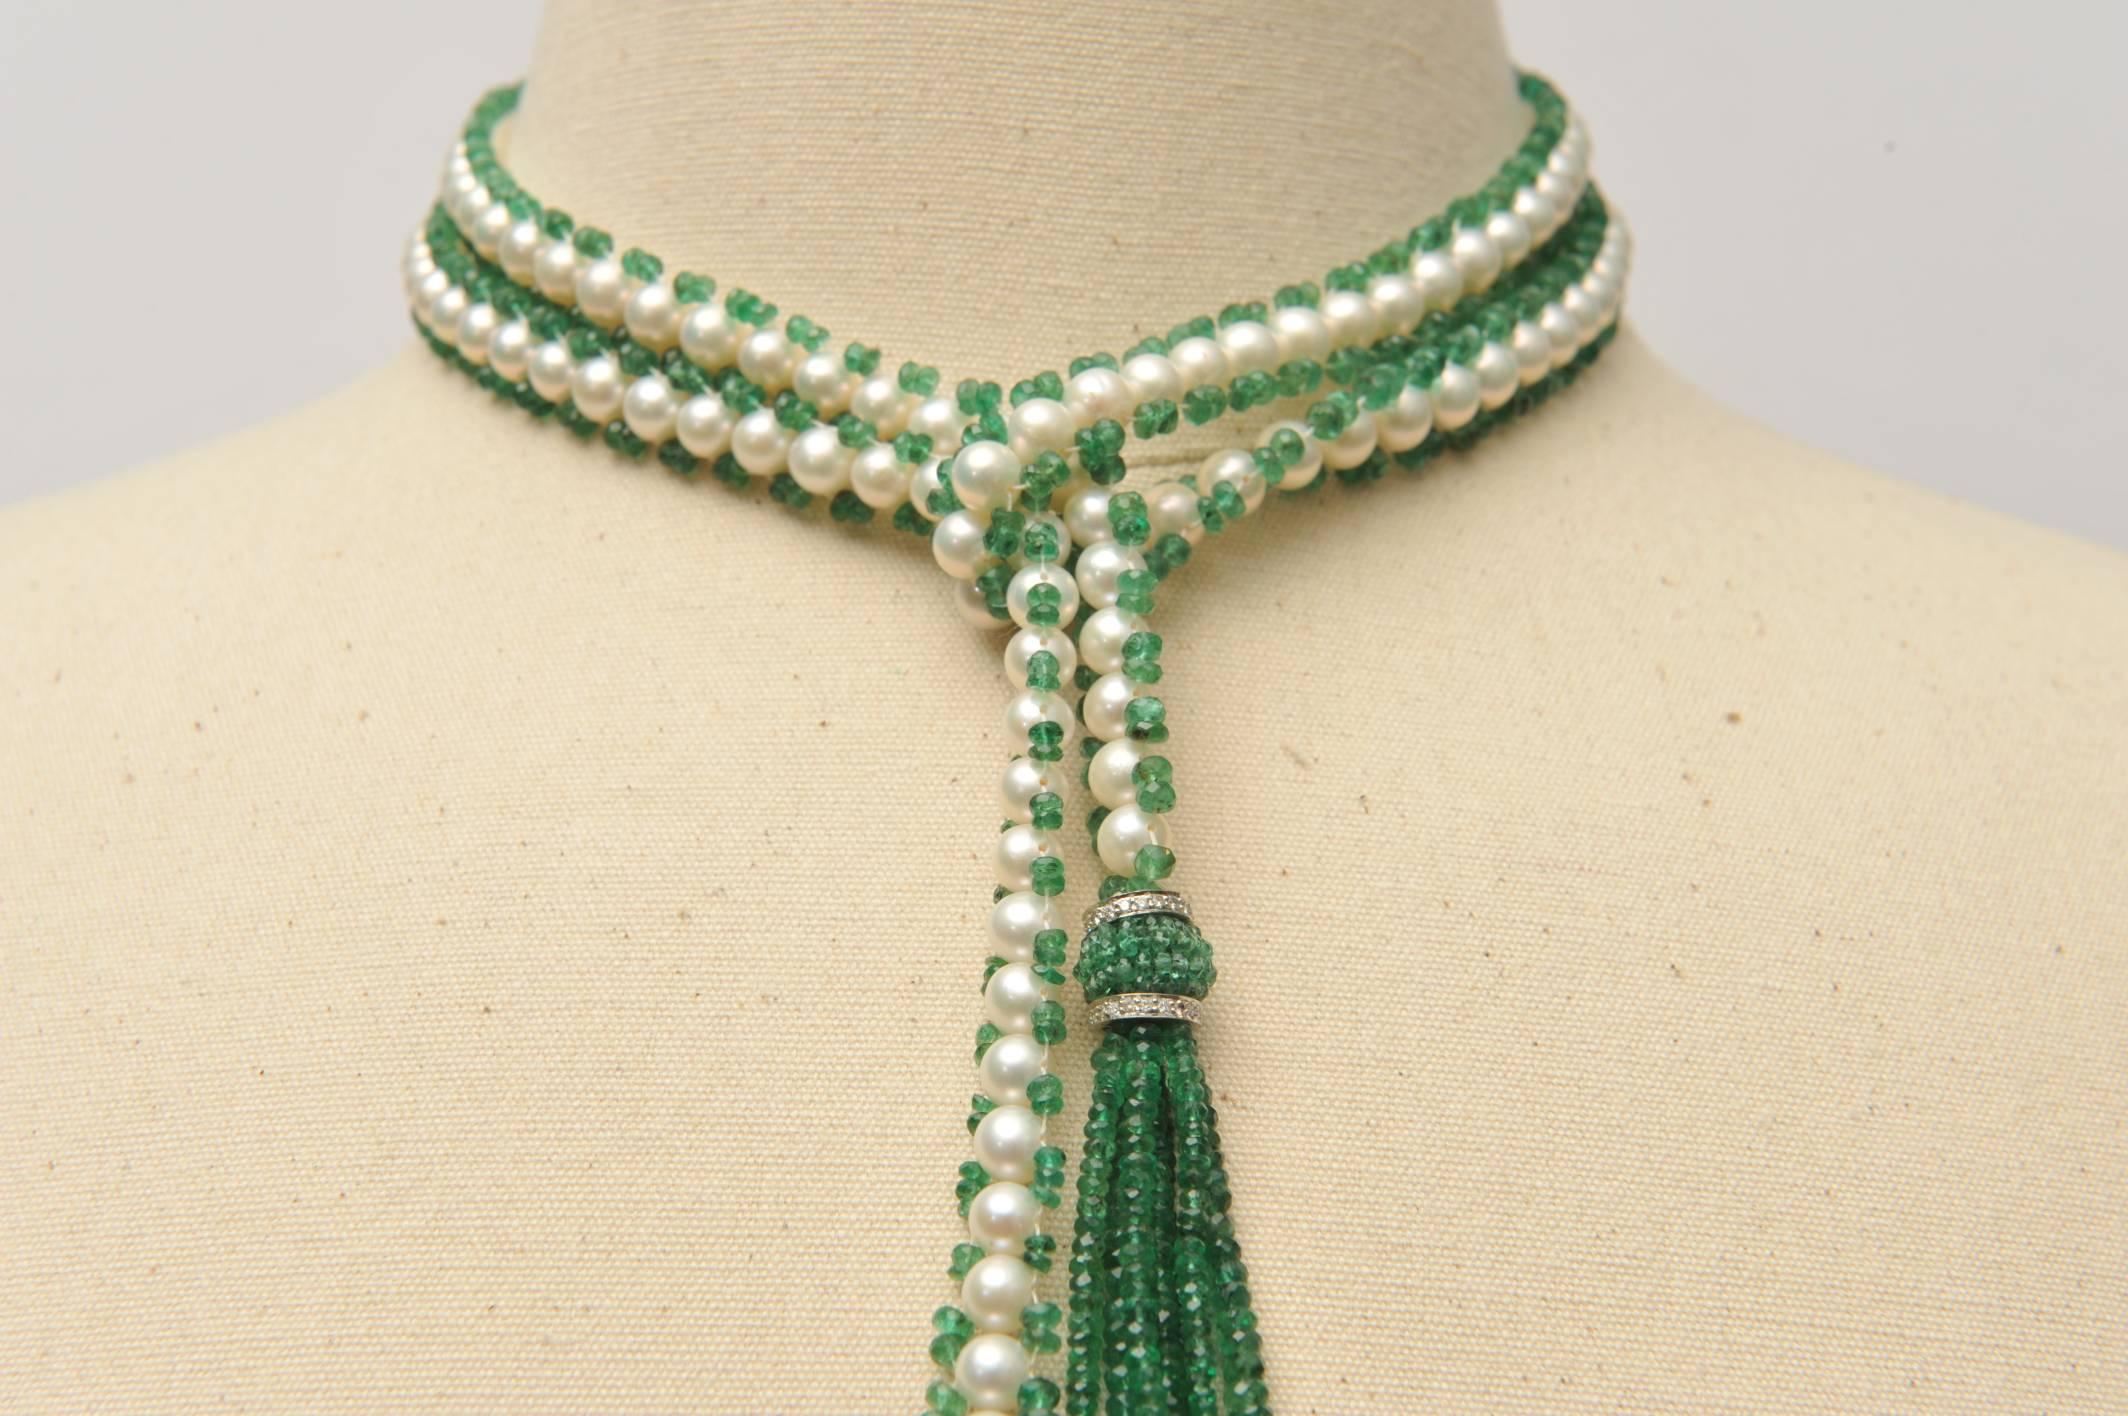 A stunning faceted emerald and cultured pearl lariat necklace with 18K white gold and diamond rondelles bordering the beaded emerald cluster above the tassel, and seed pearls at the bottom.  Wear this long or short, sexy either way.